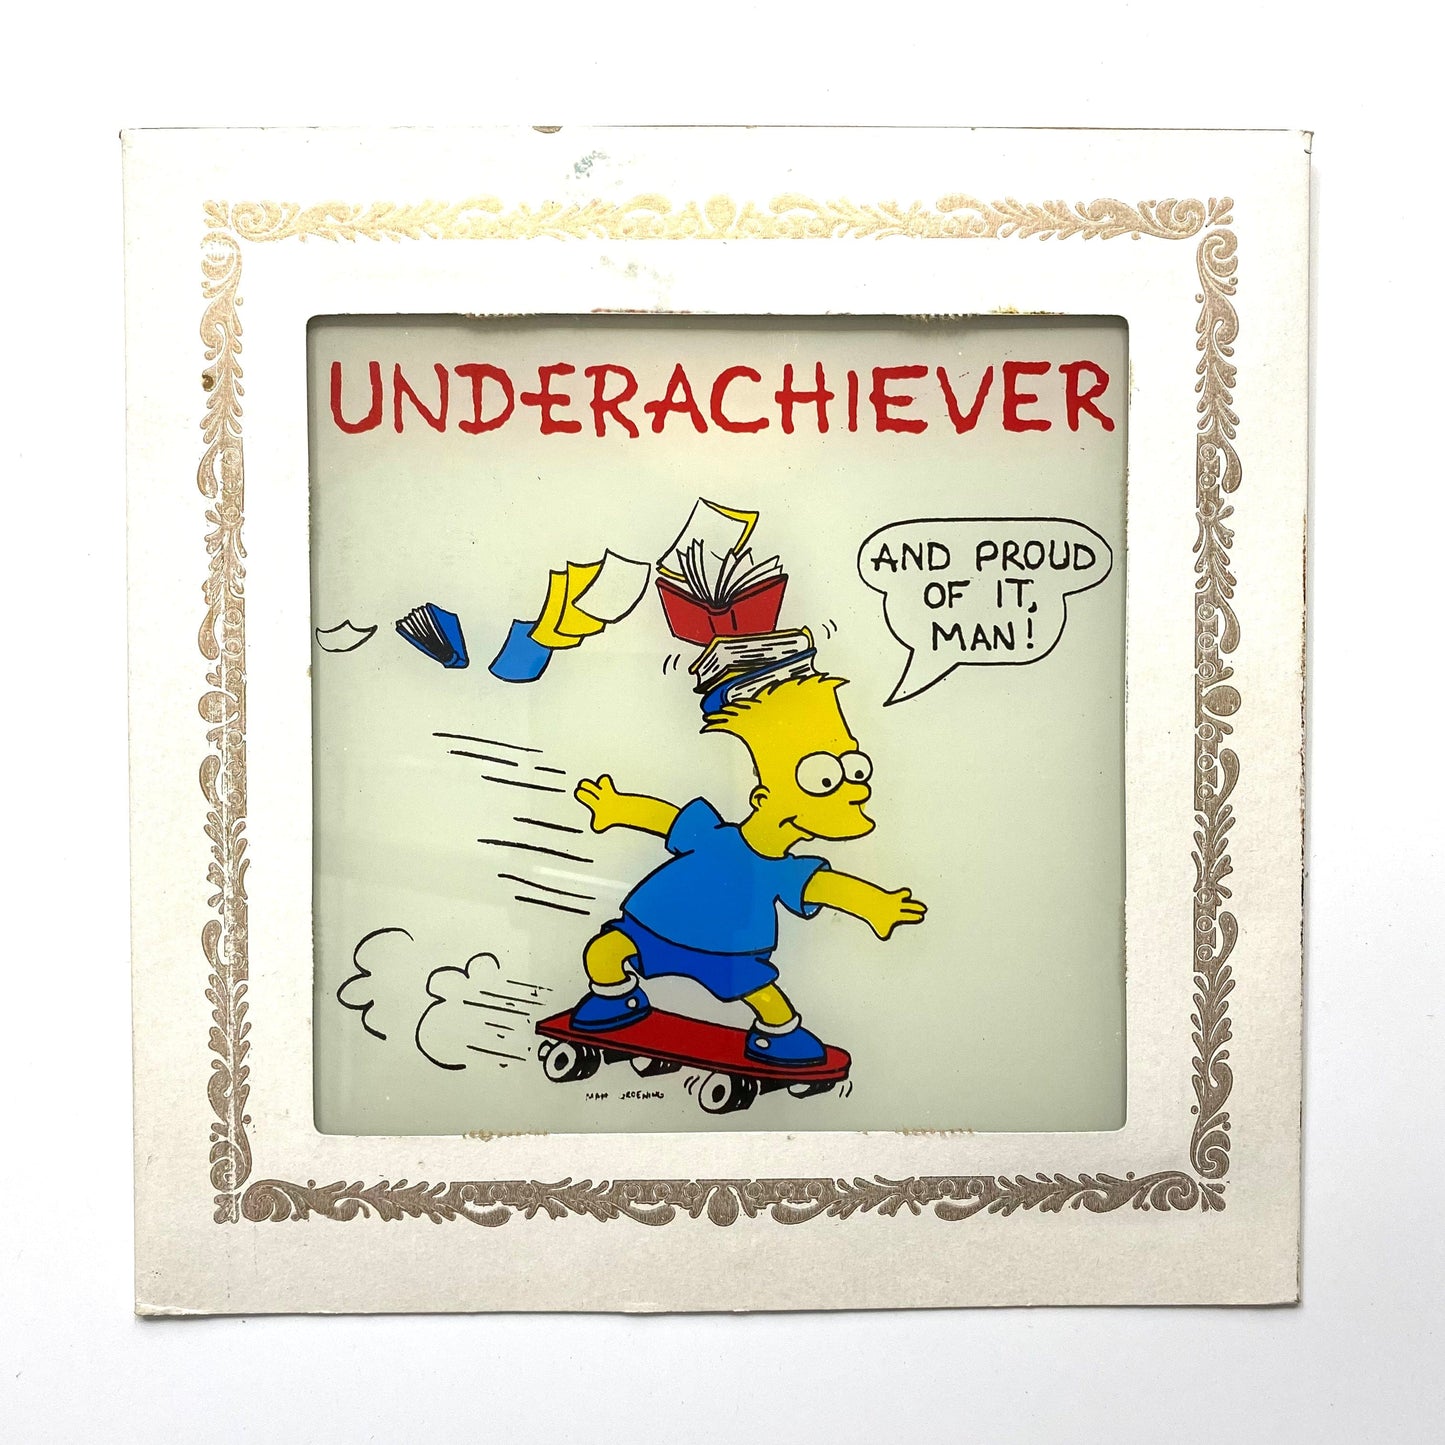 Vintage Bart Simpson “Underachiever And Proud Of It, Man!” Whiskey Glass Carnival Fair Prize Giveaway 6”x6” 1980’s